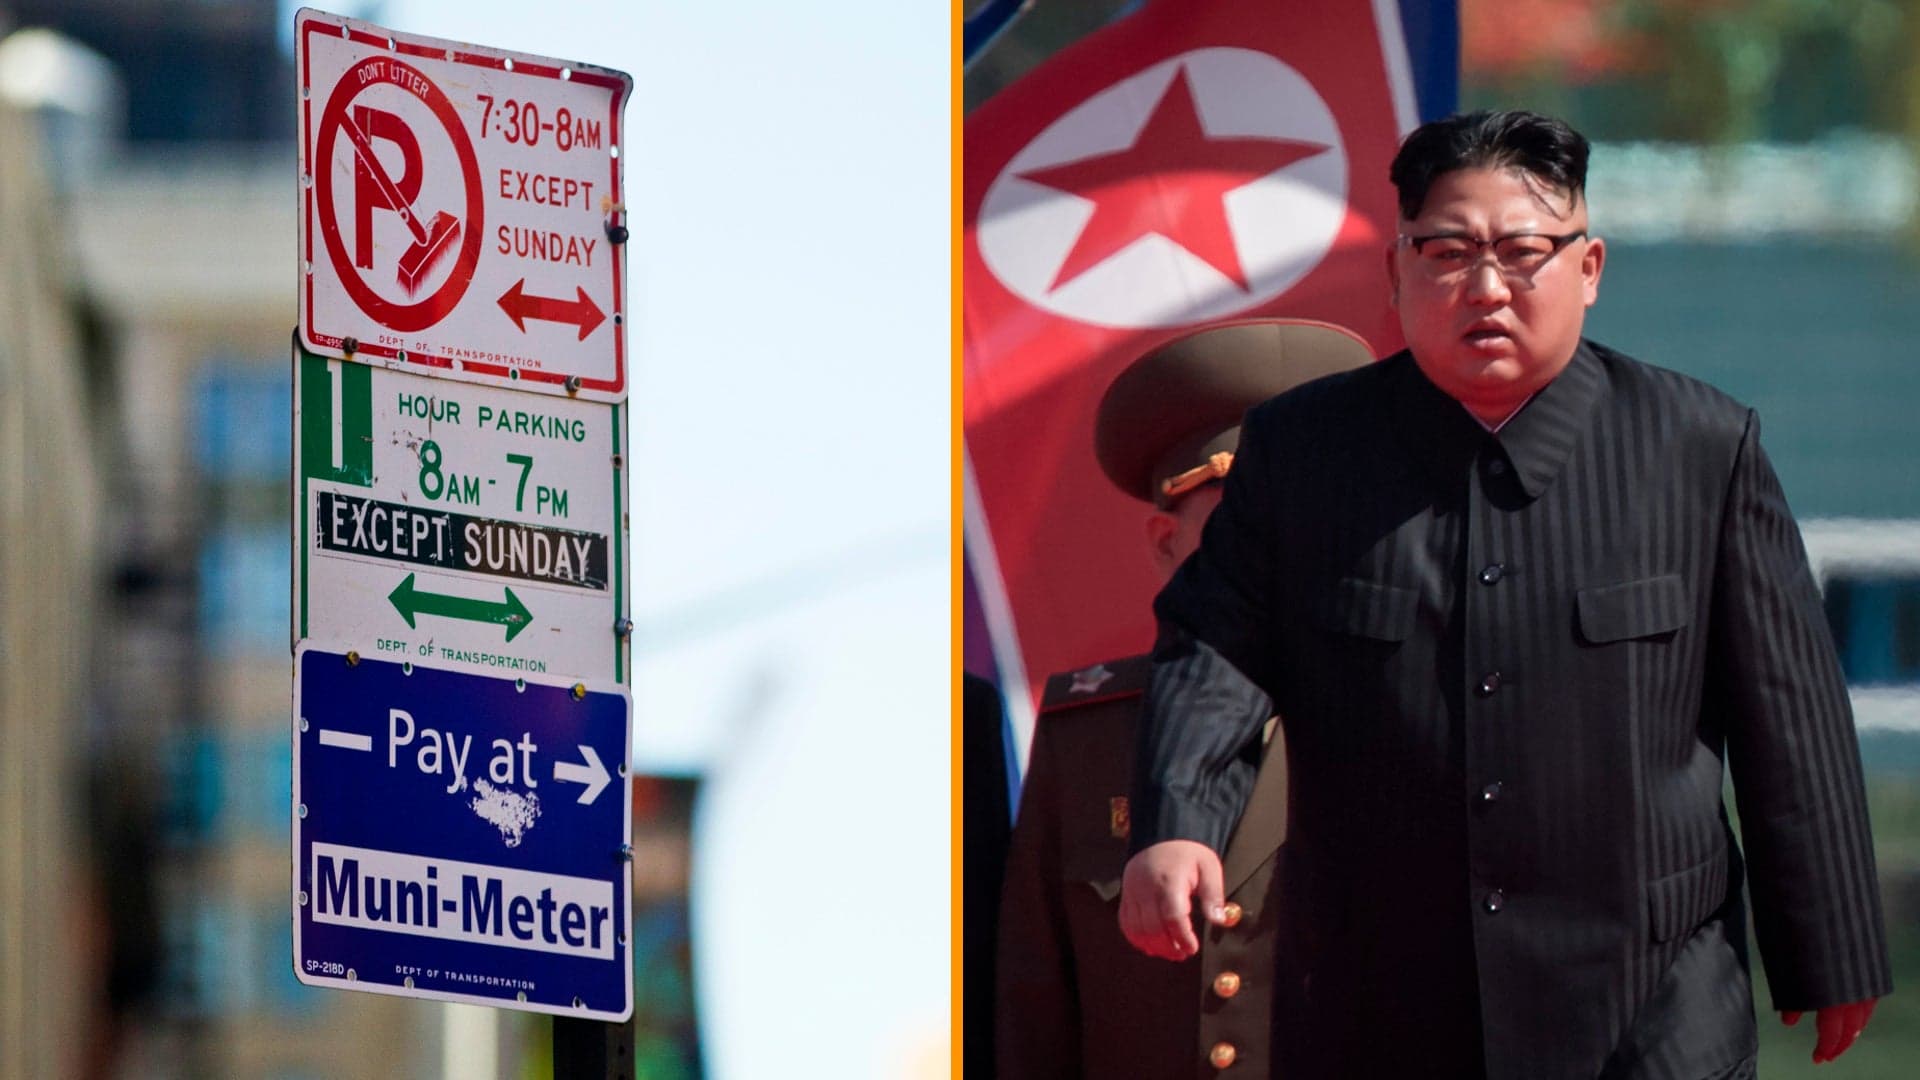 North Korea Owes New York City $156,000 in Unpaid Parking Tickets, Report Says